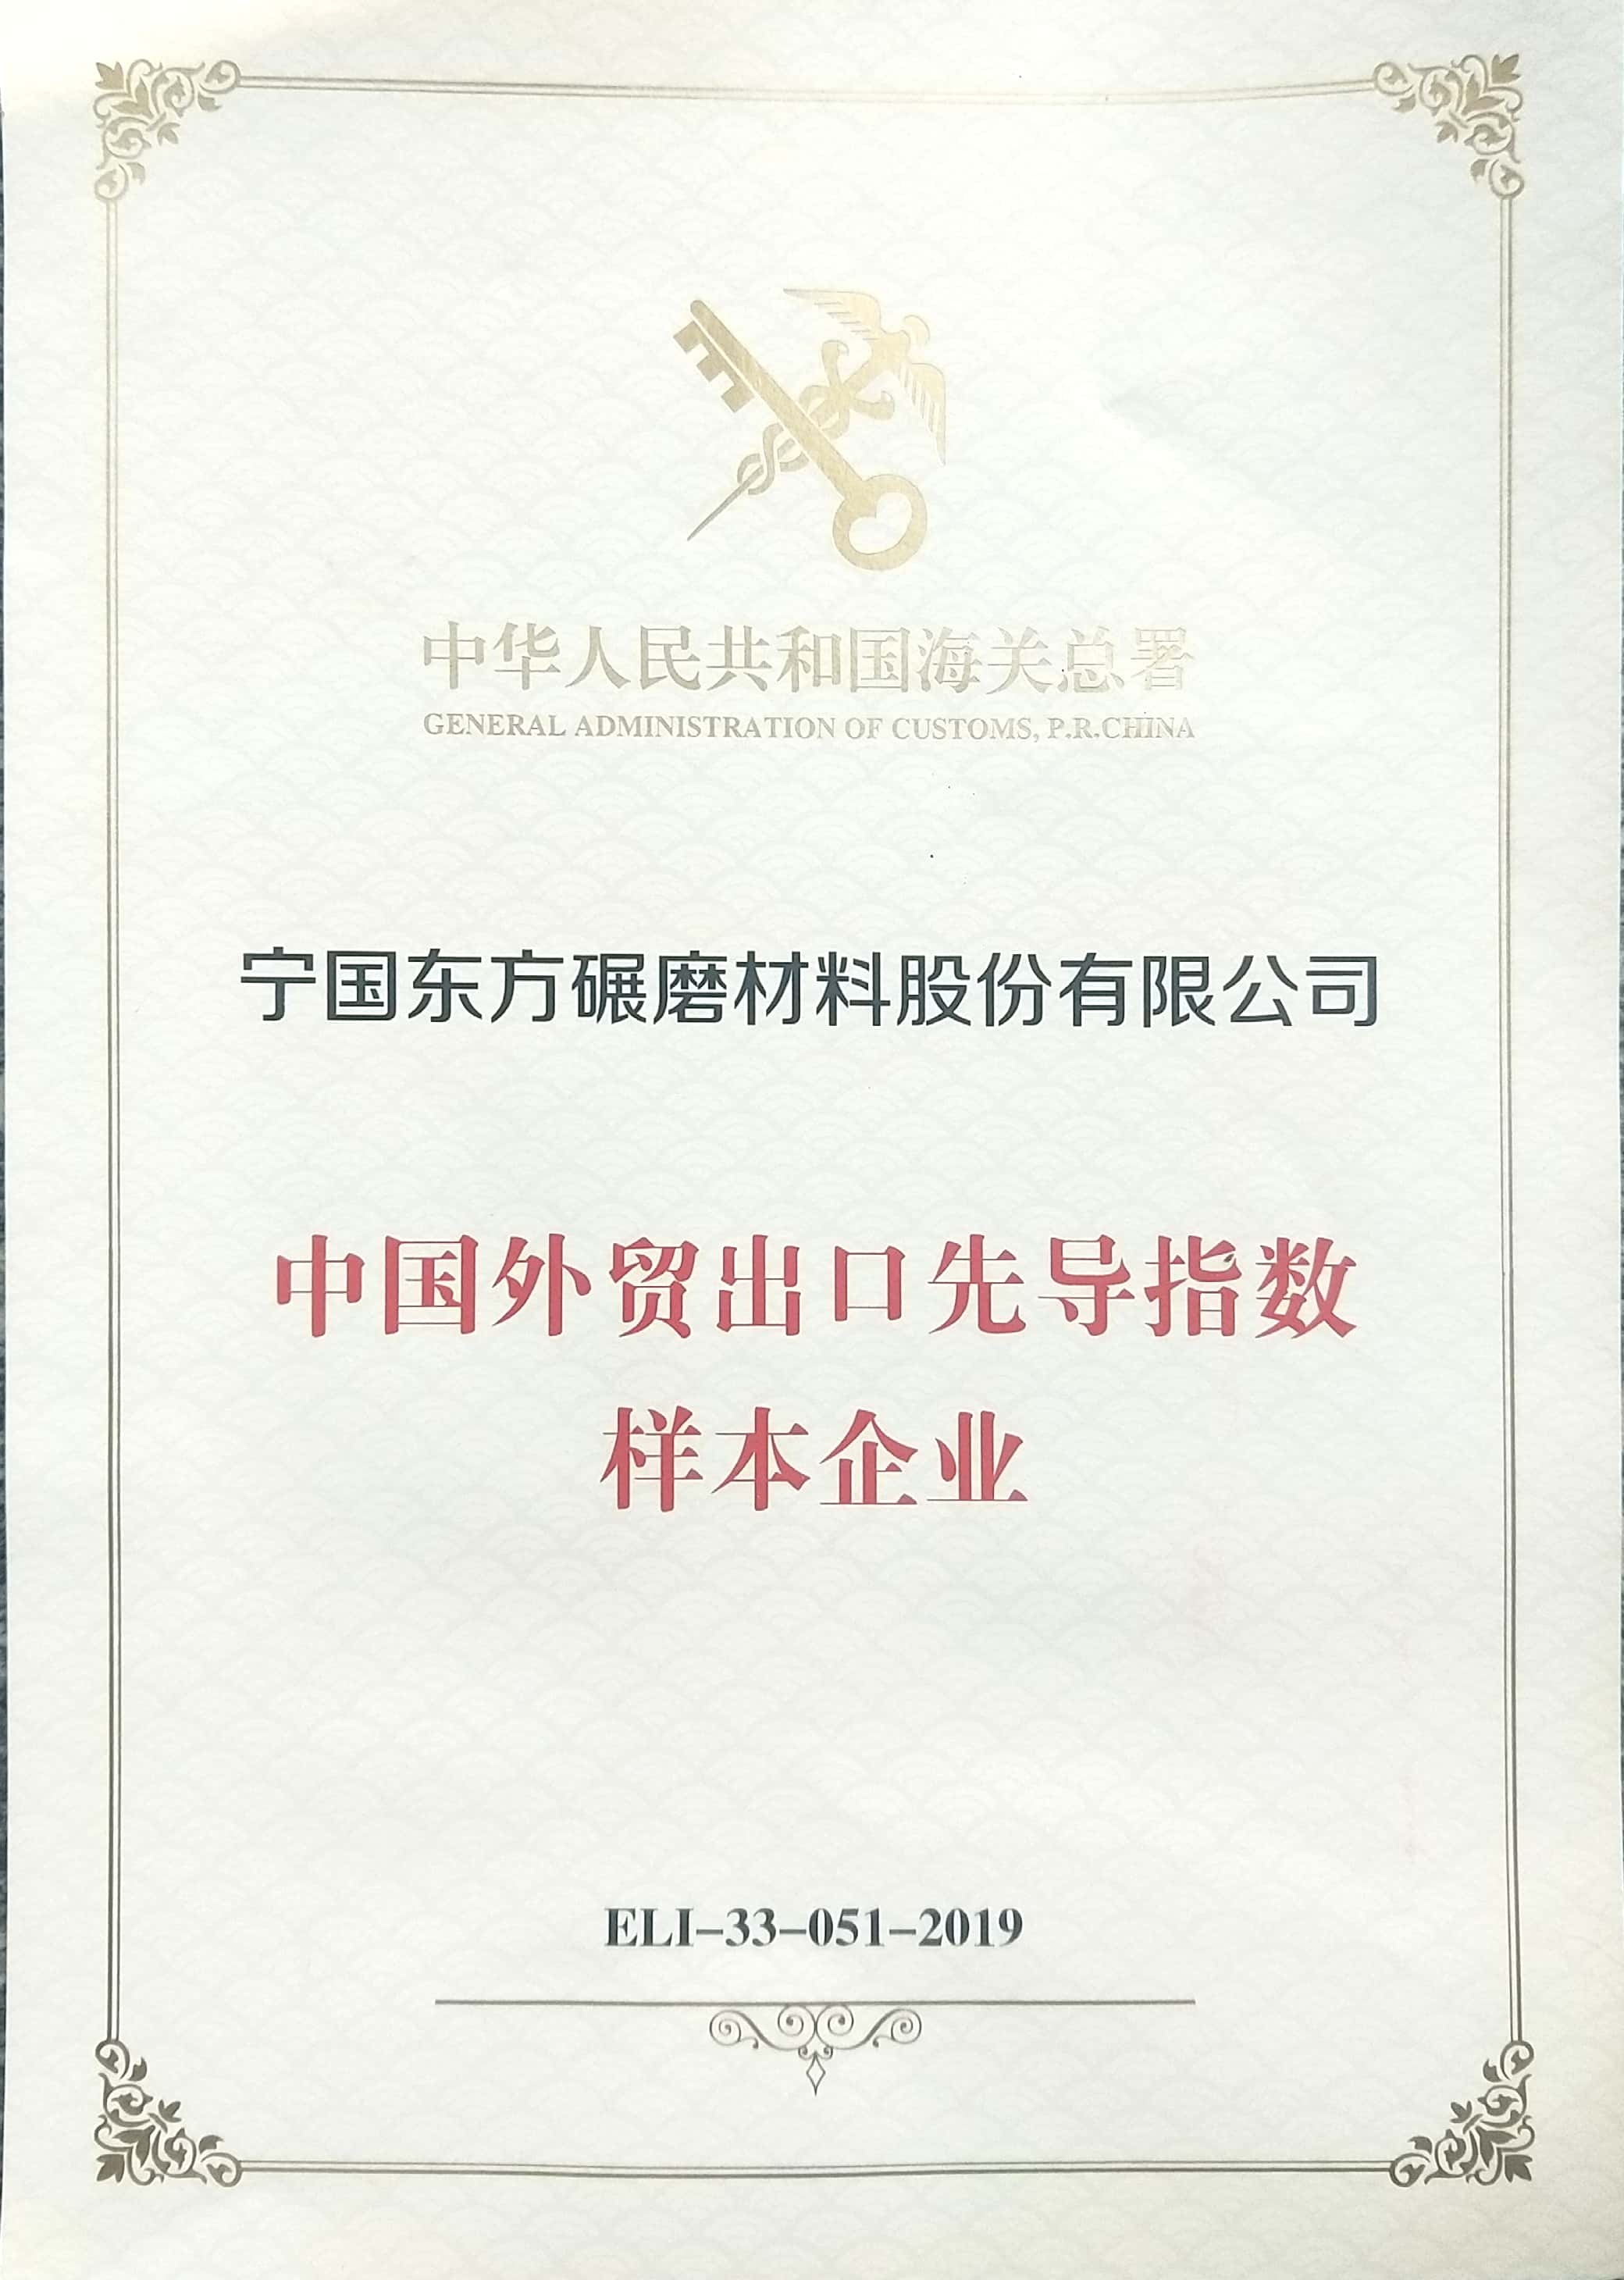 The company was awarded "China's foreign trade export leading index sample enterprises"